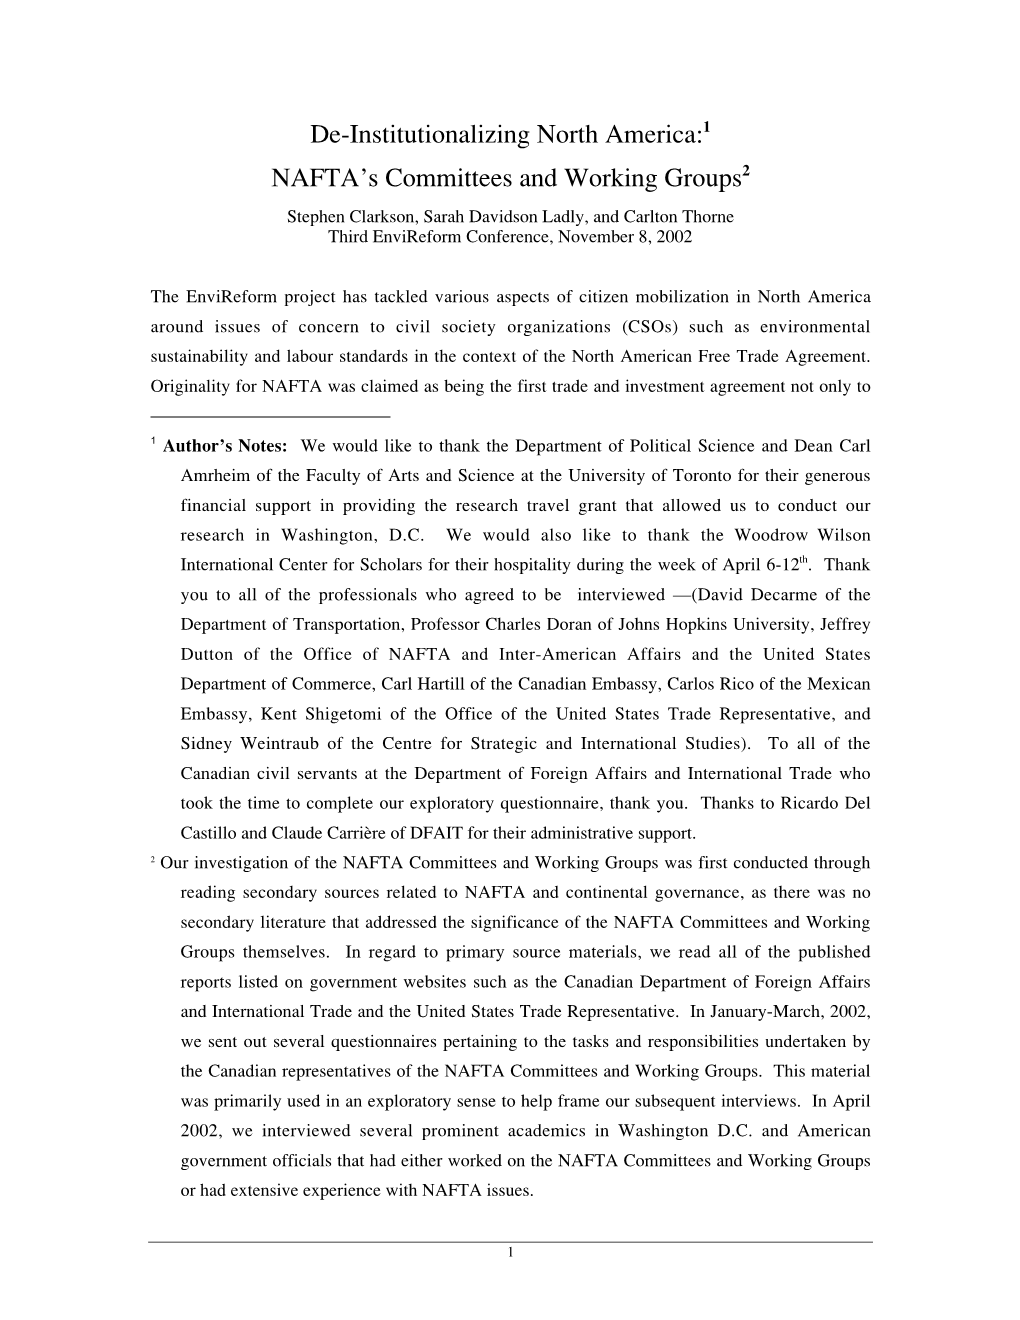 De-Institutionalizing North America:1 NAFTA's Committees and Working